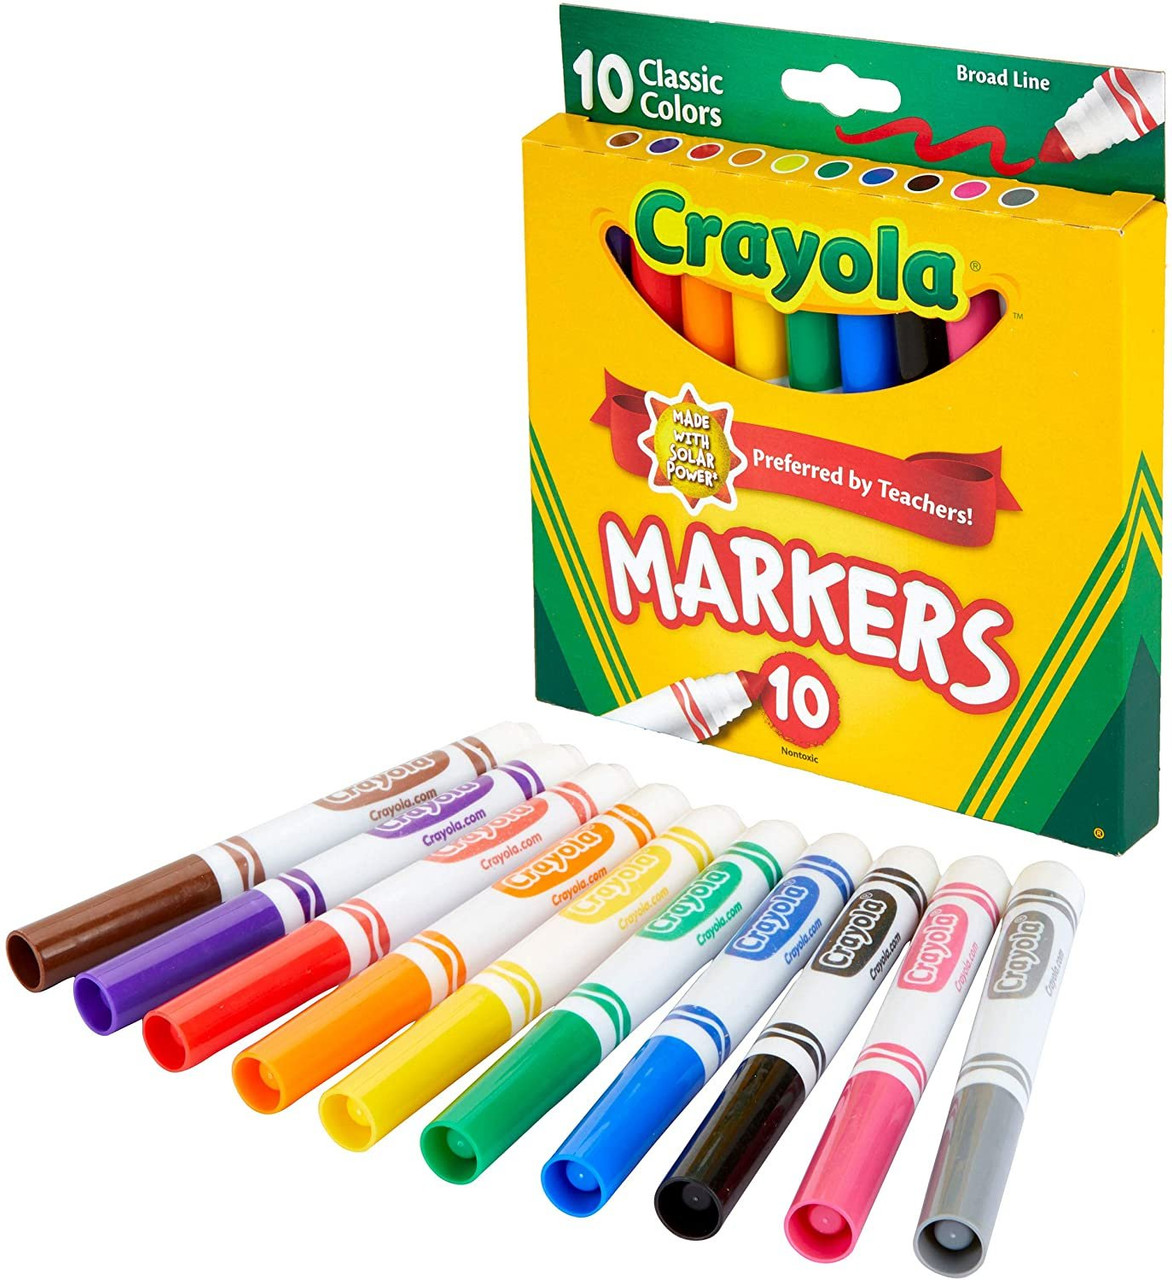 Crayola Washable Markers, Broad Point, Classic Colors, 12 Set - Sam's Club